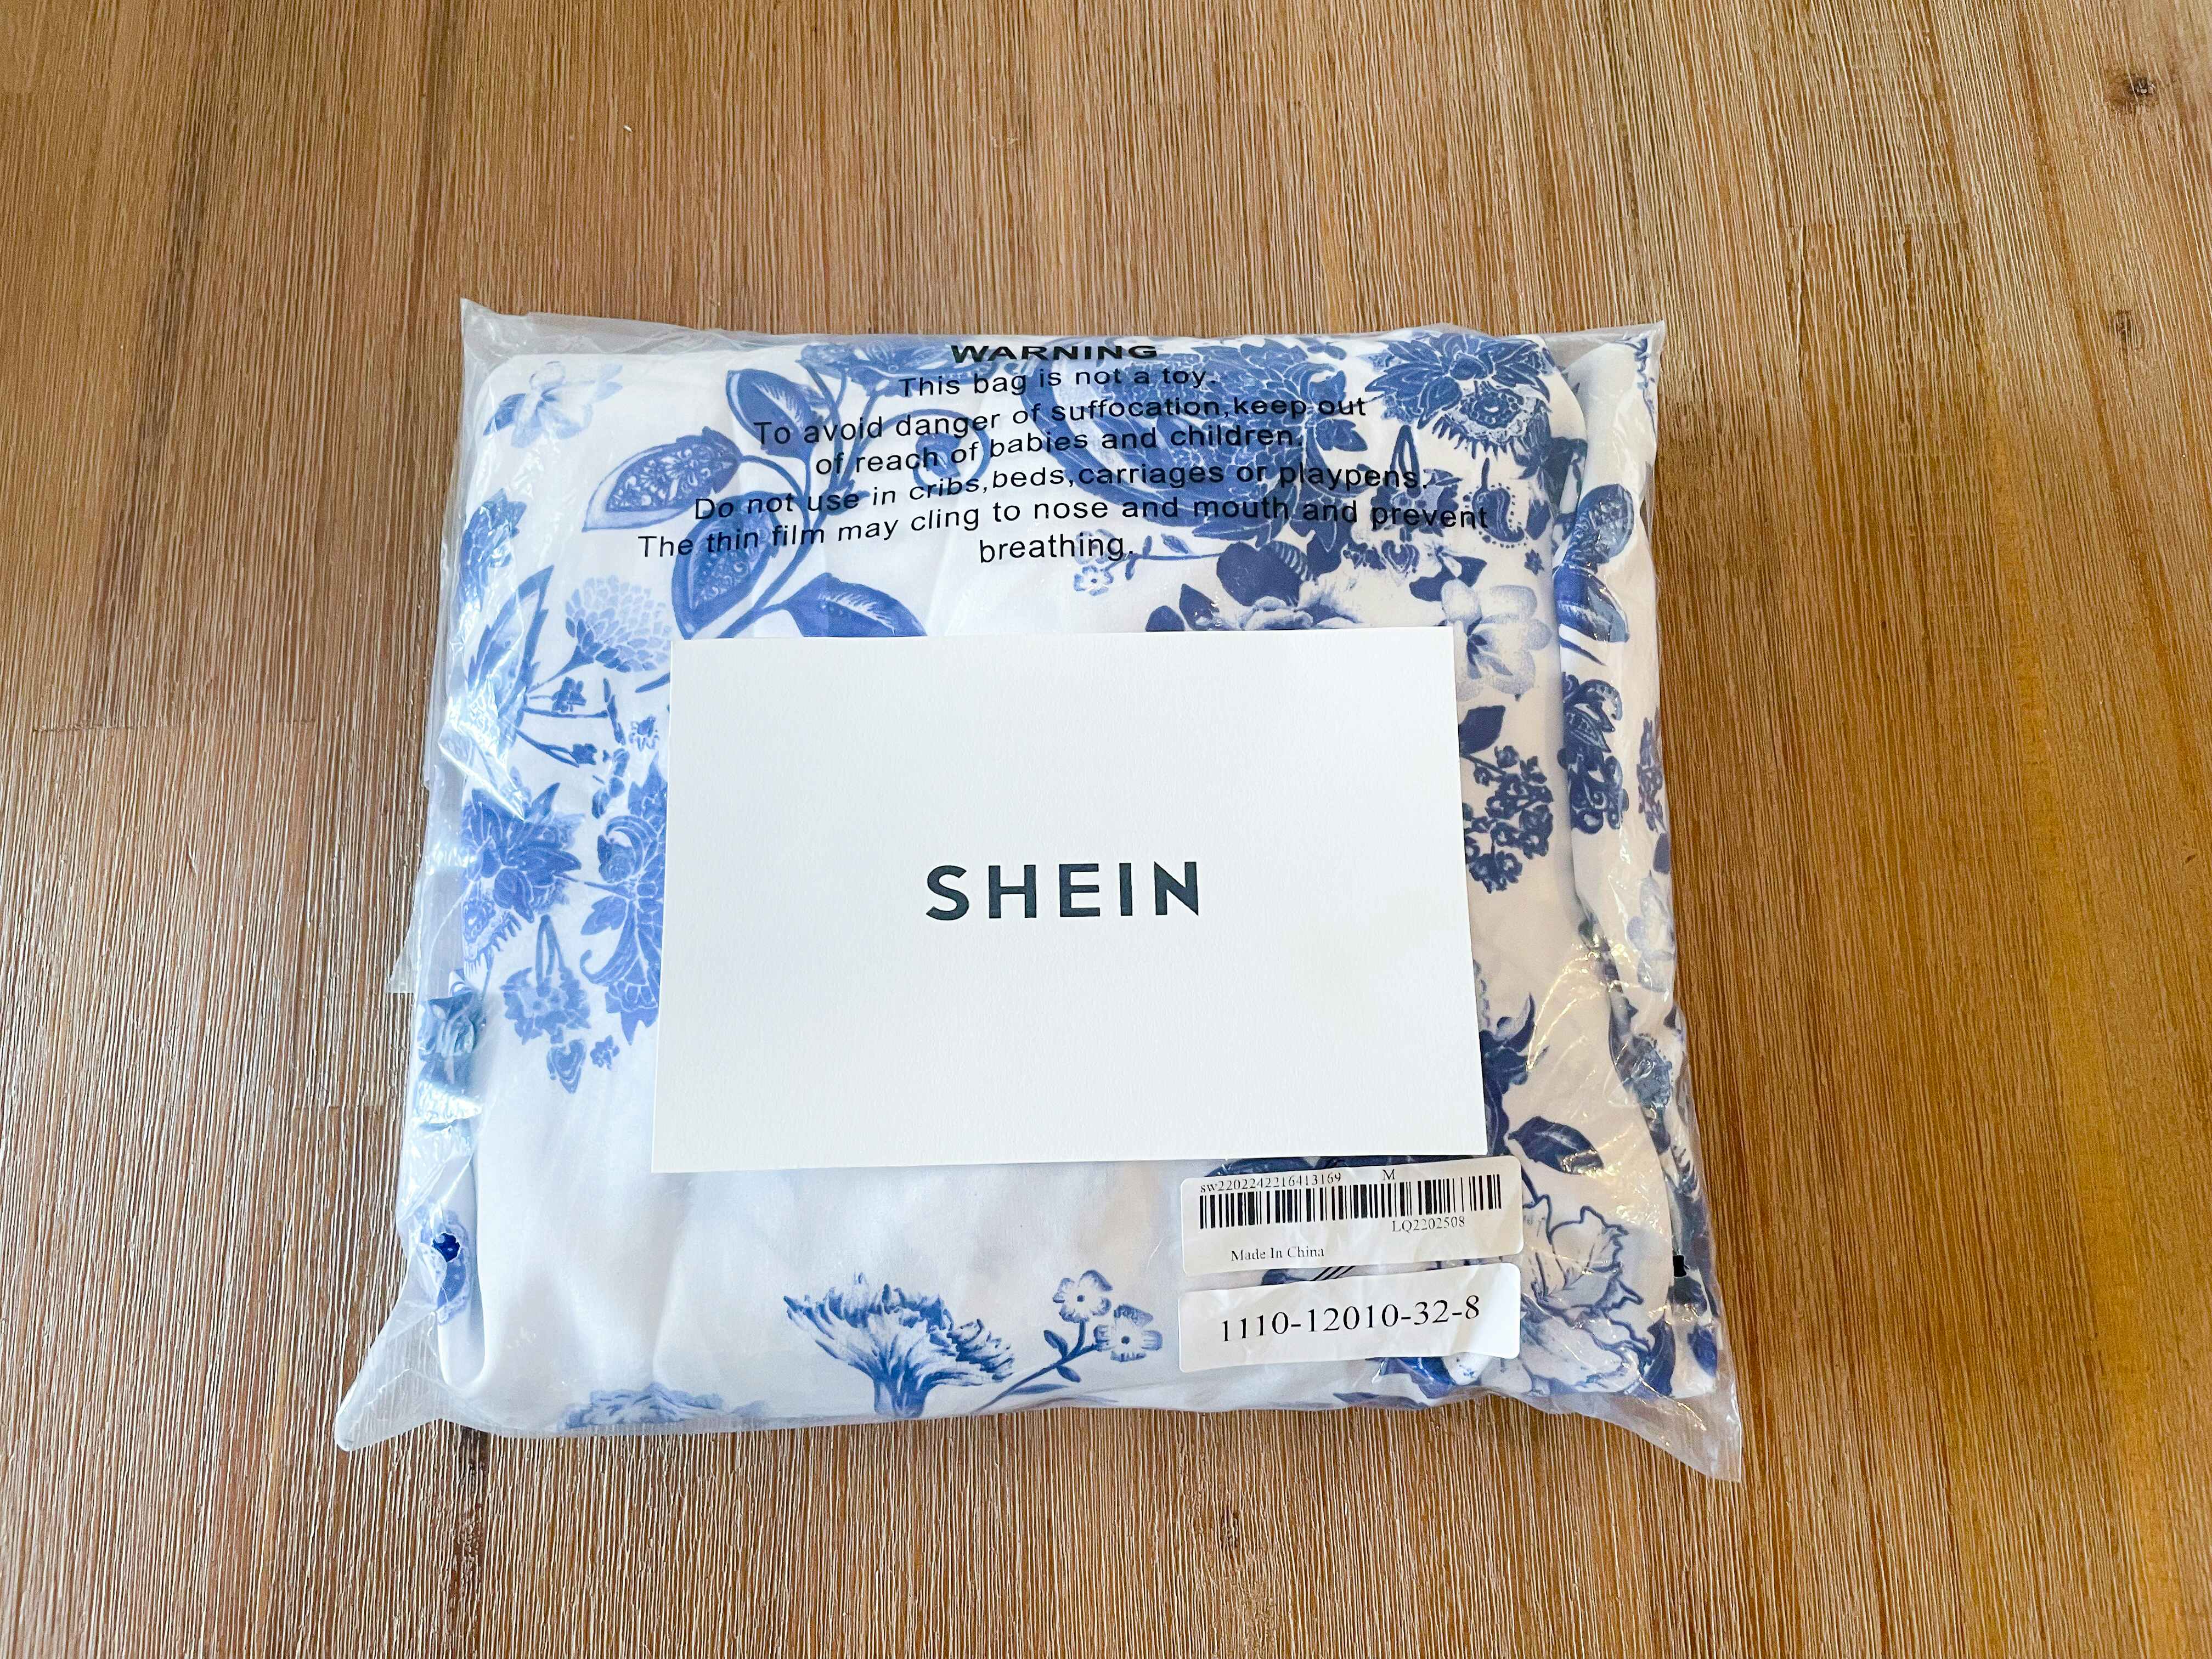 SHEIN JEWELRY, PURSES AND SHOES HAUL